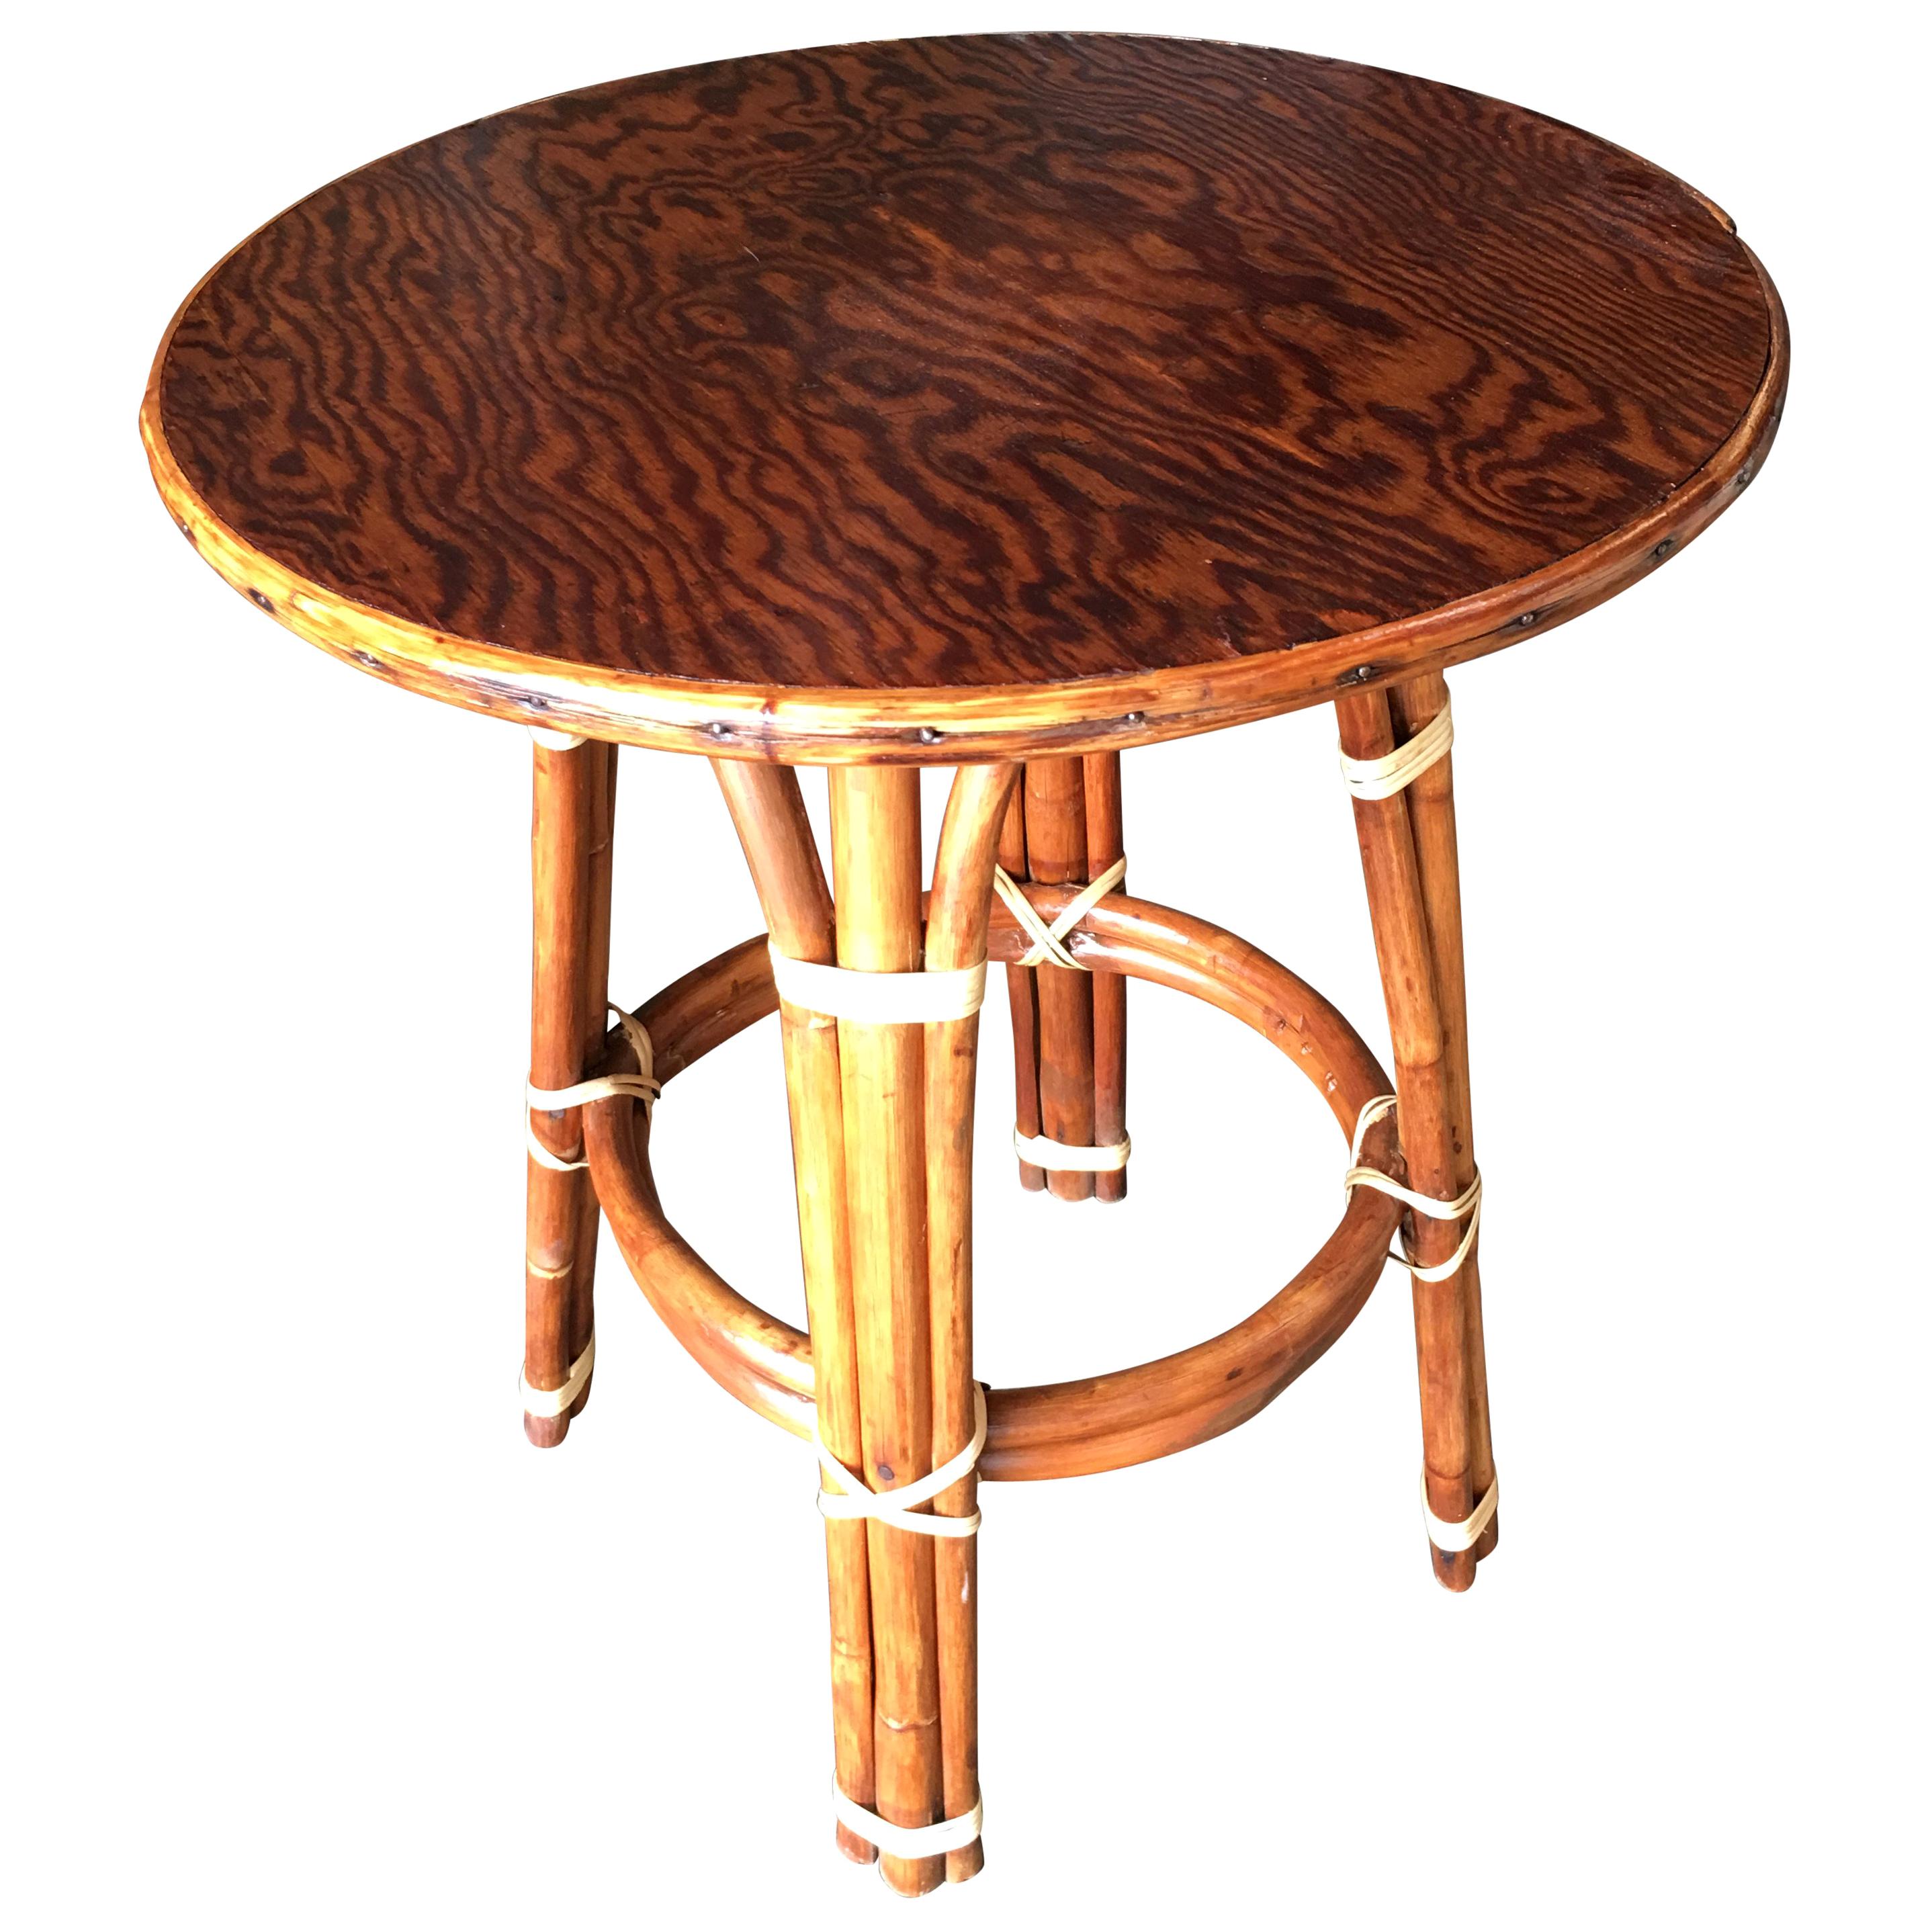 Restored Rattan ‘Double Circle’ Drink Table with Mahogany Top